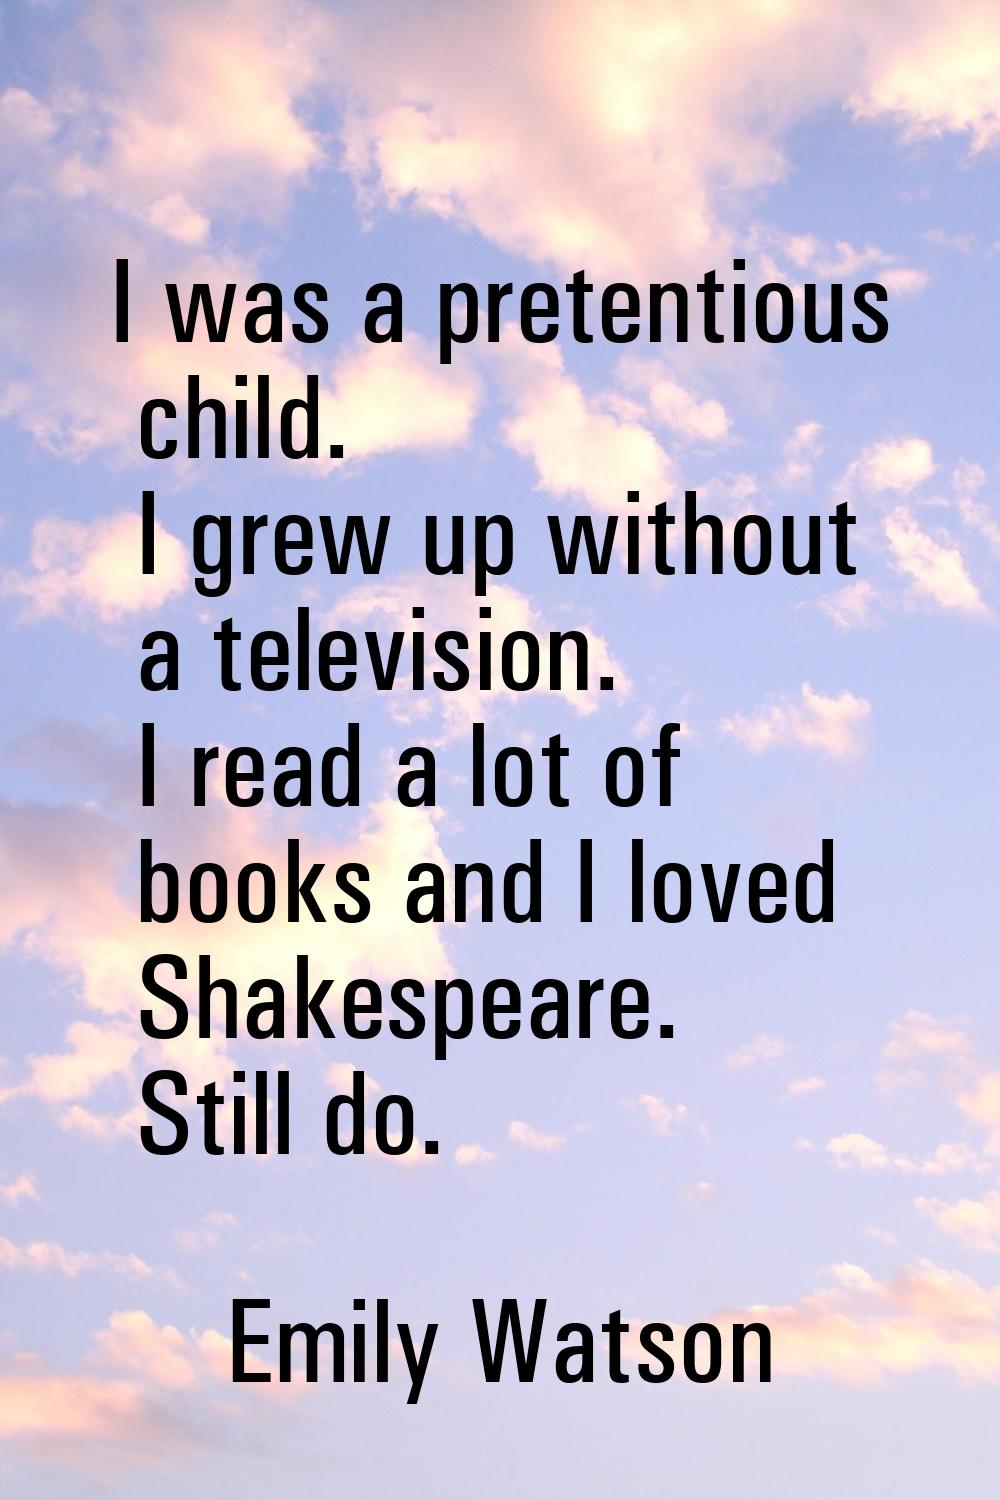 I was a pretentious child. I grew up without a television. I read a lot of books and I loved Shakes